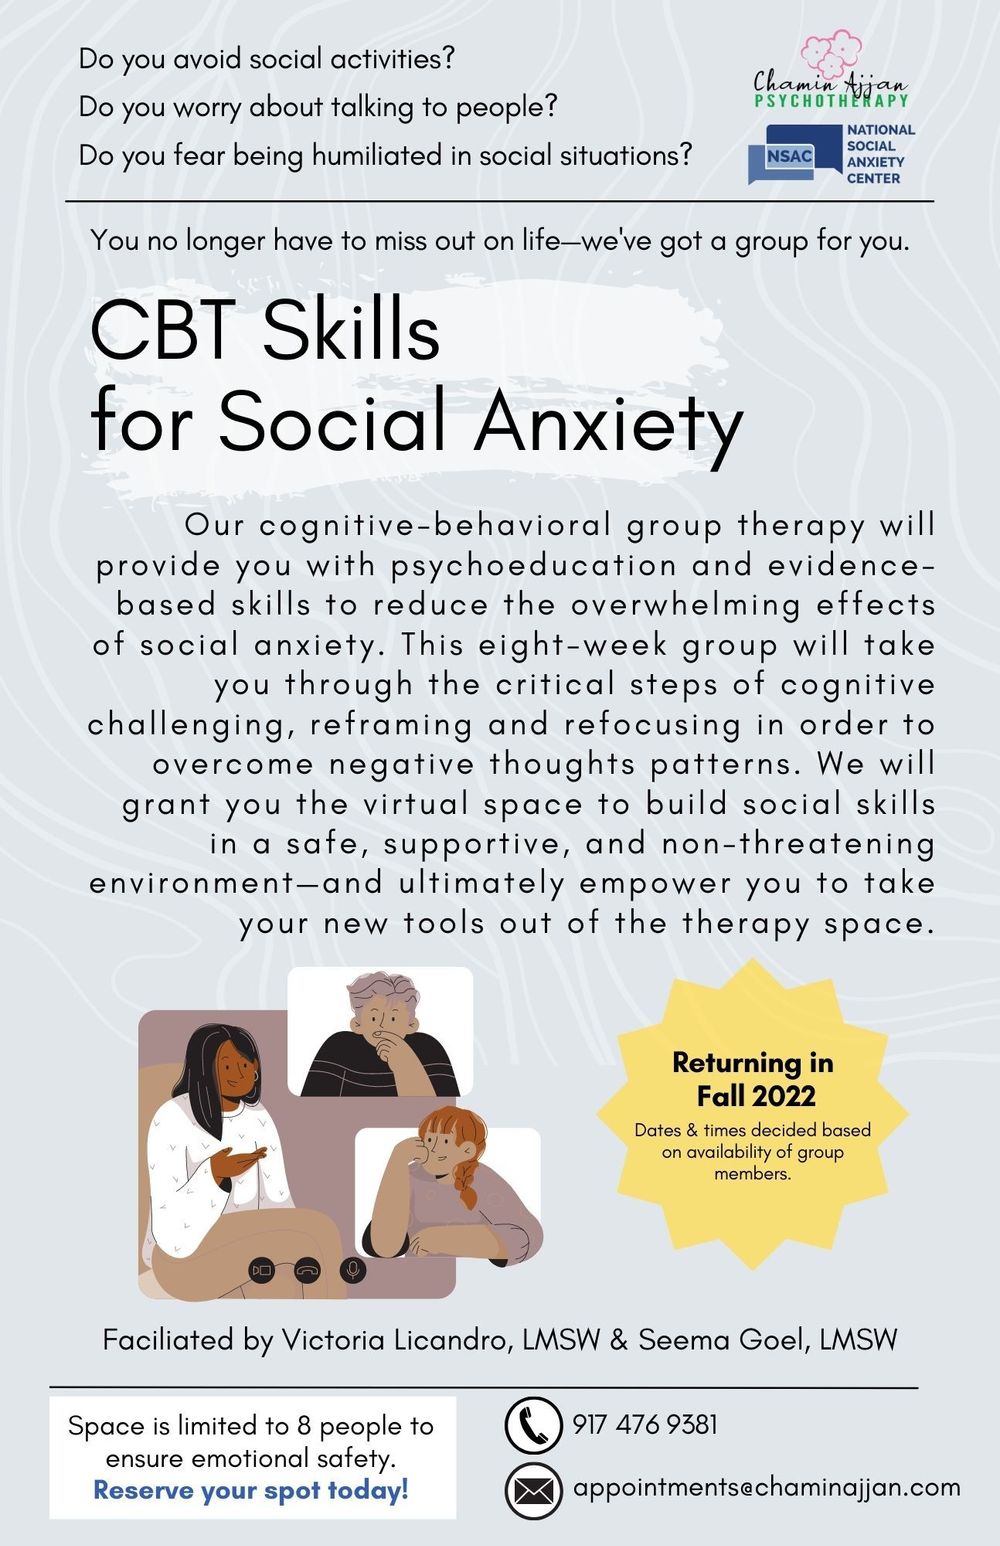 Group Therapy: CBT for Social Anxiety
Starting in Fall 2022 - Sign up today!